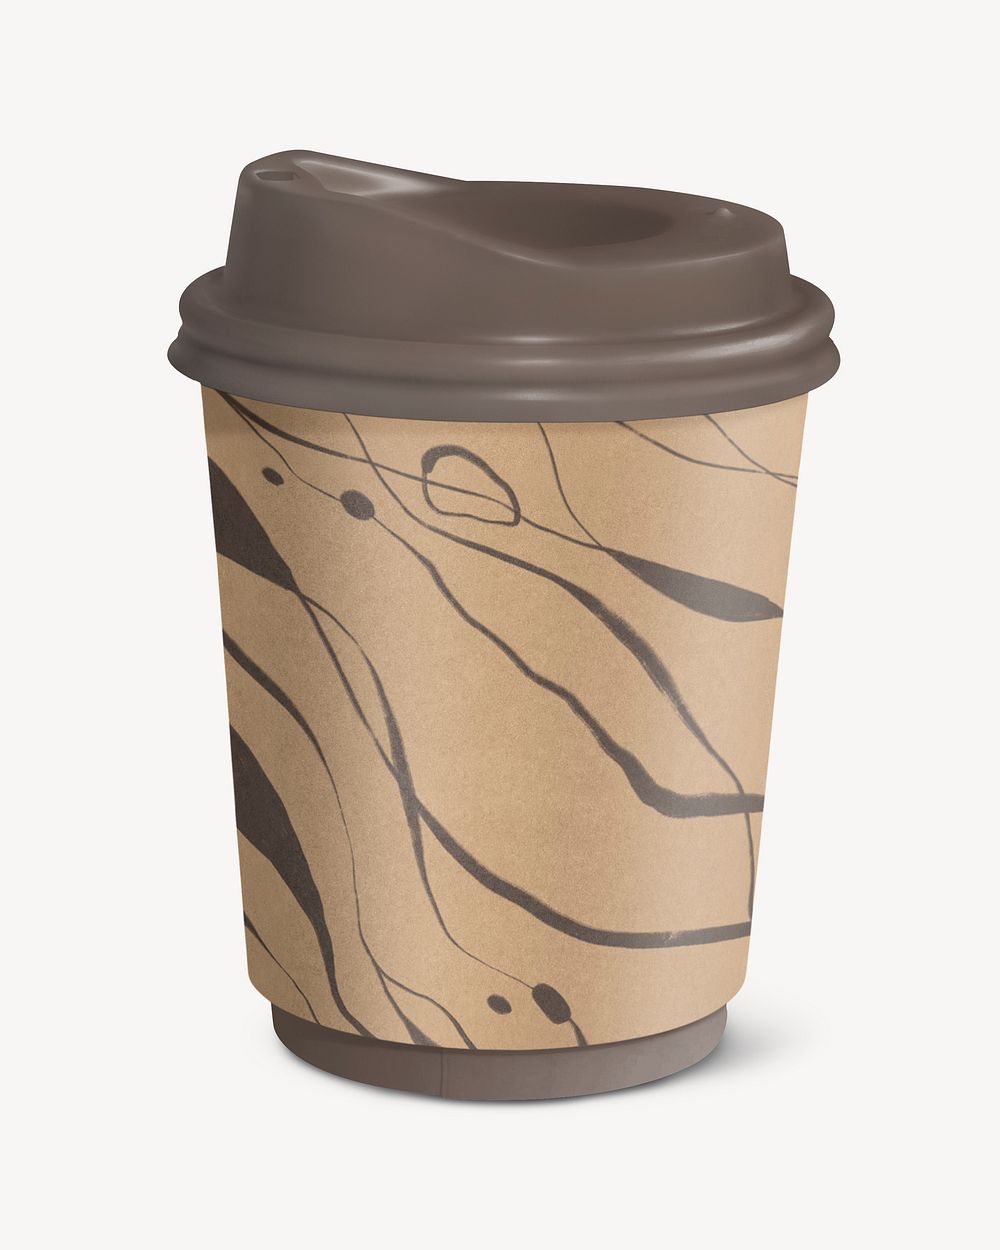 Aesthetic brown coffee cup, hot drink product packaging